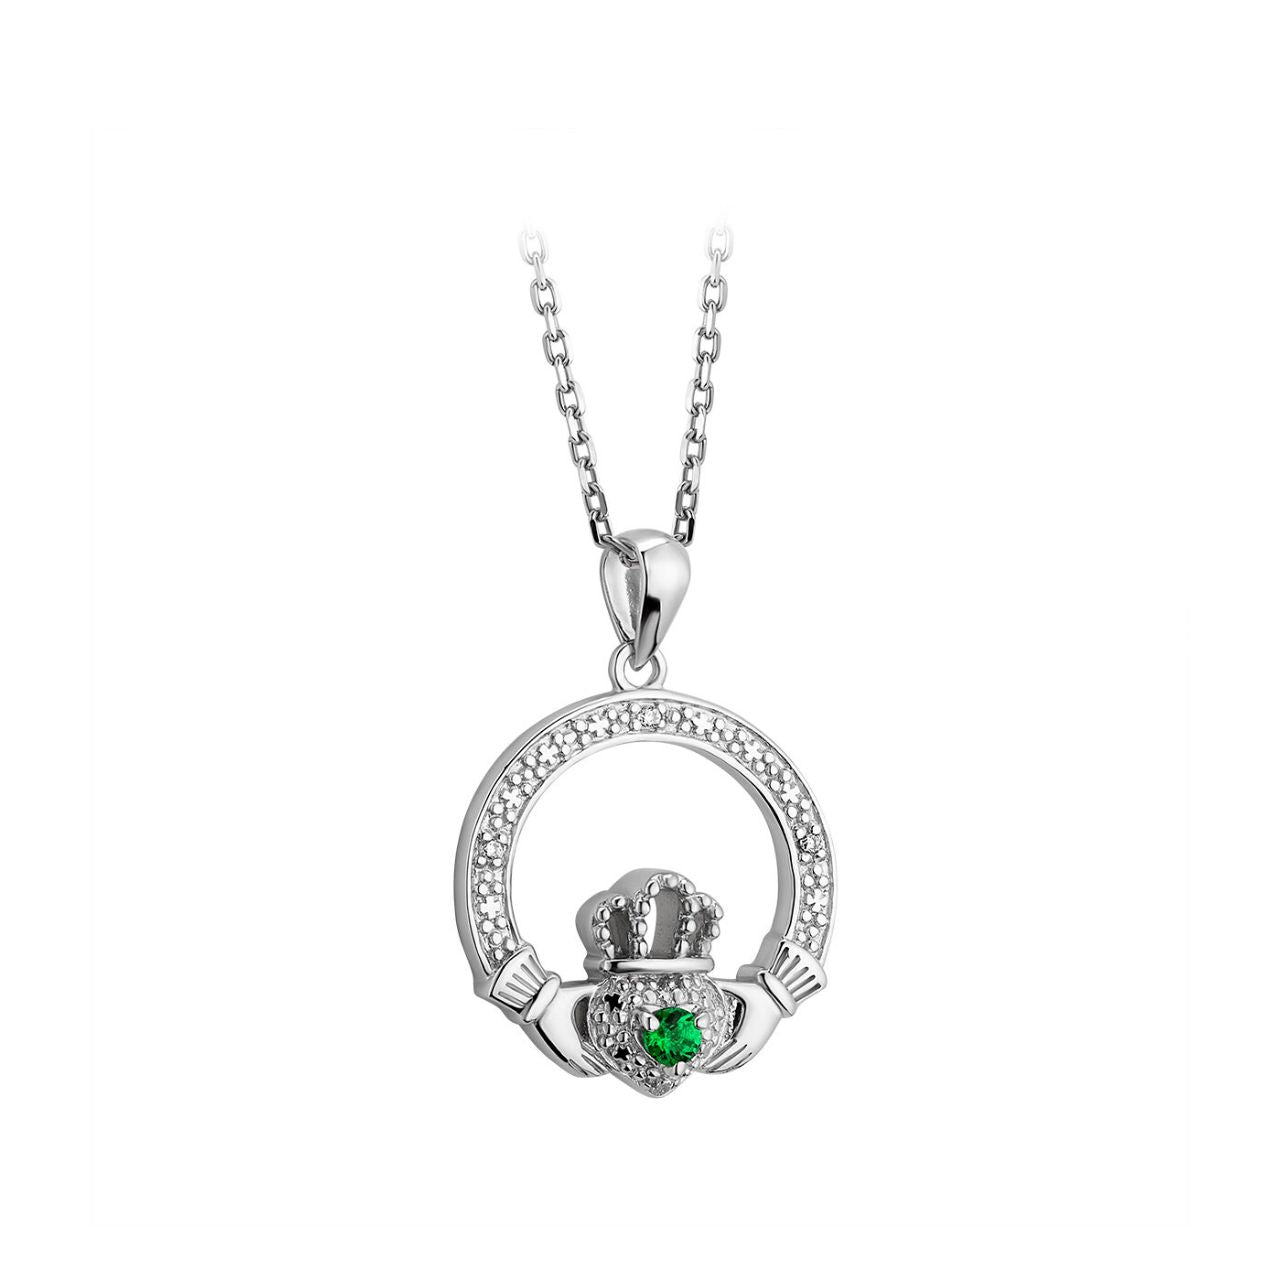 Silver Crystal Illusion Claddagh Necklace  This sterling sliver Claddagh necklace is decorated with white crystals and completed with a vibrant green crystal at the heart. Claddagh jewellery is a perfect gift for loved ones and friends, as The Claddagh heart represents love, the hands symbolise friendship, and the crown stands for loyalty.